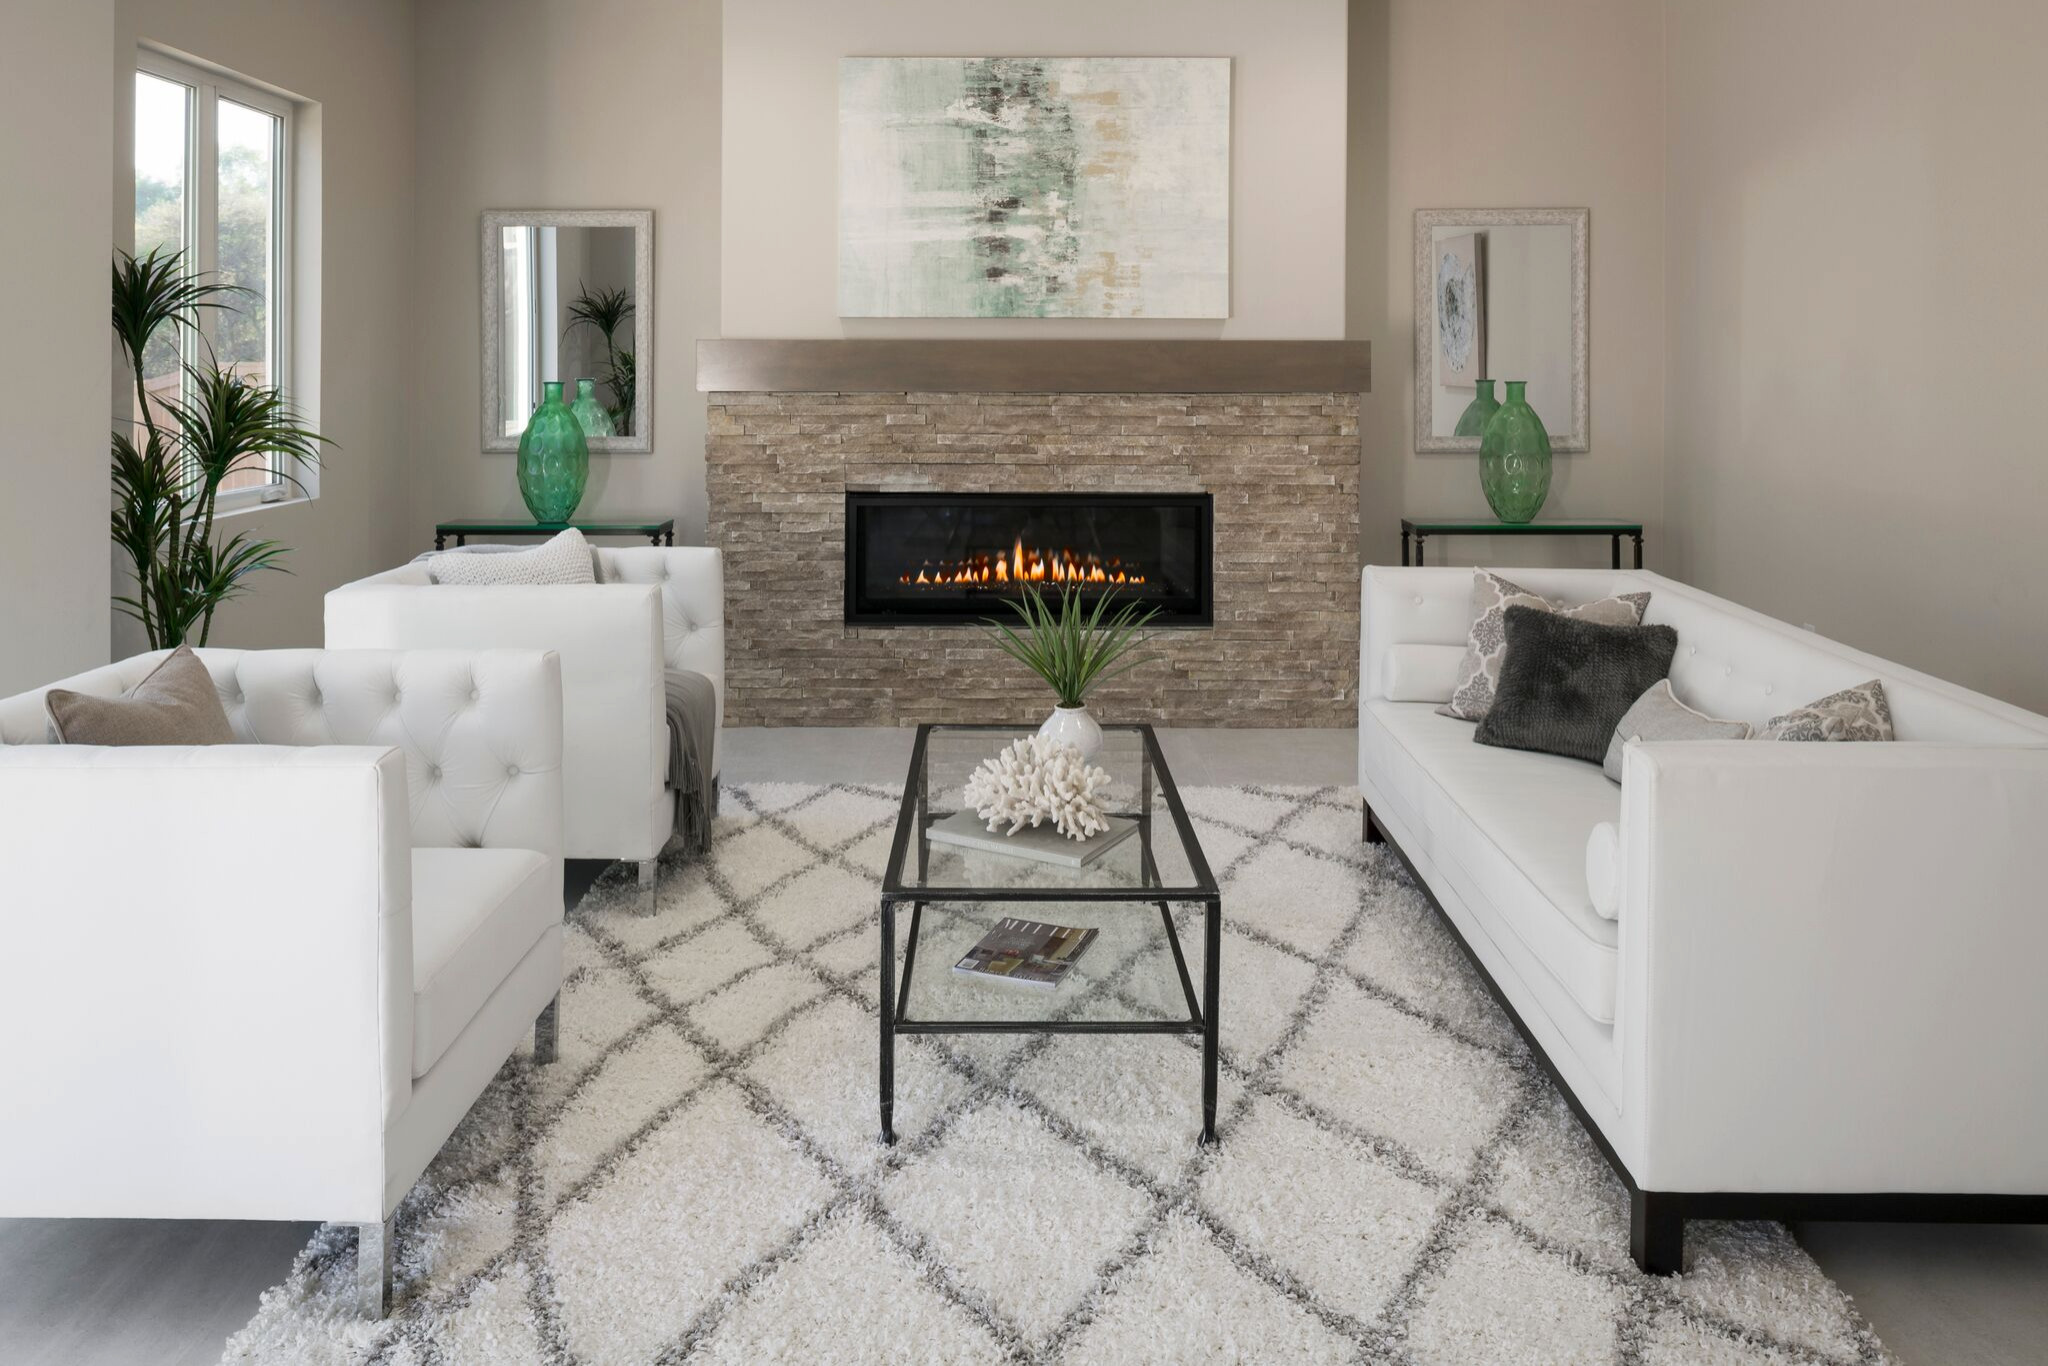 Model home staging 2018 - San Diego, CA